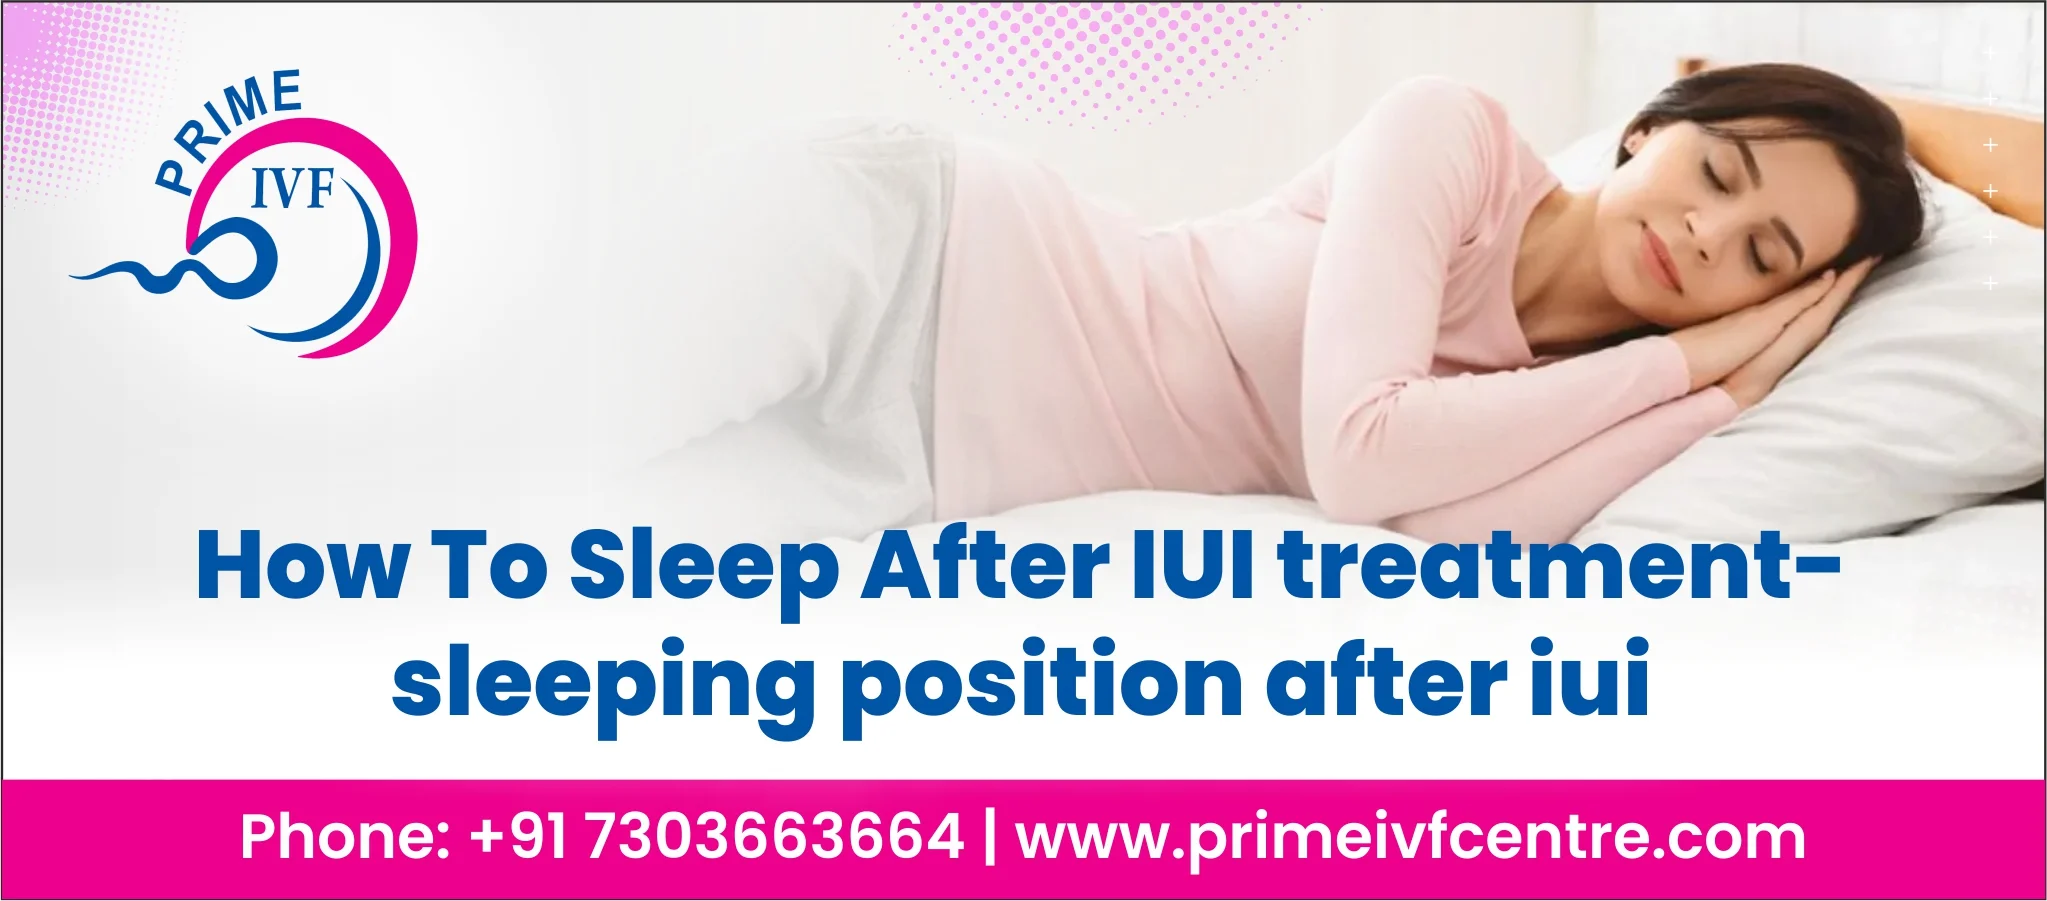 How To Sleep After IUI Treatment- Sleeping Position After IUI